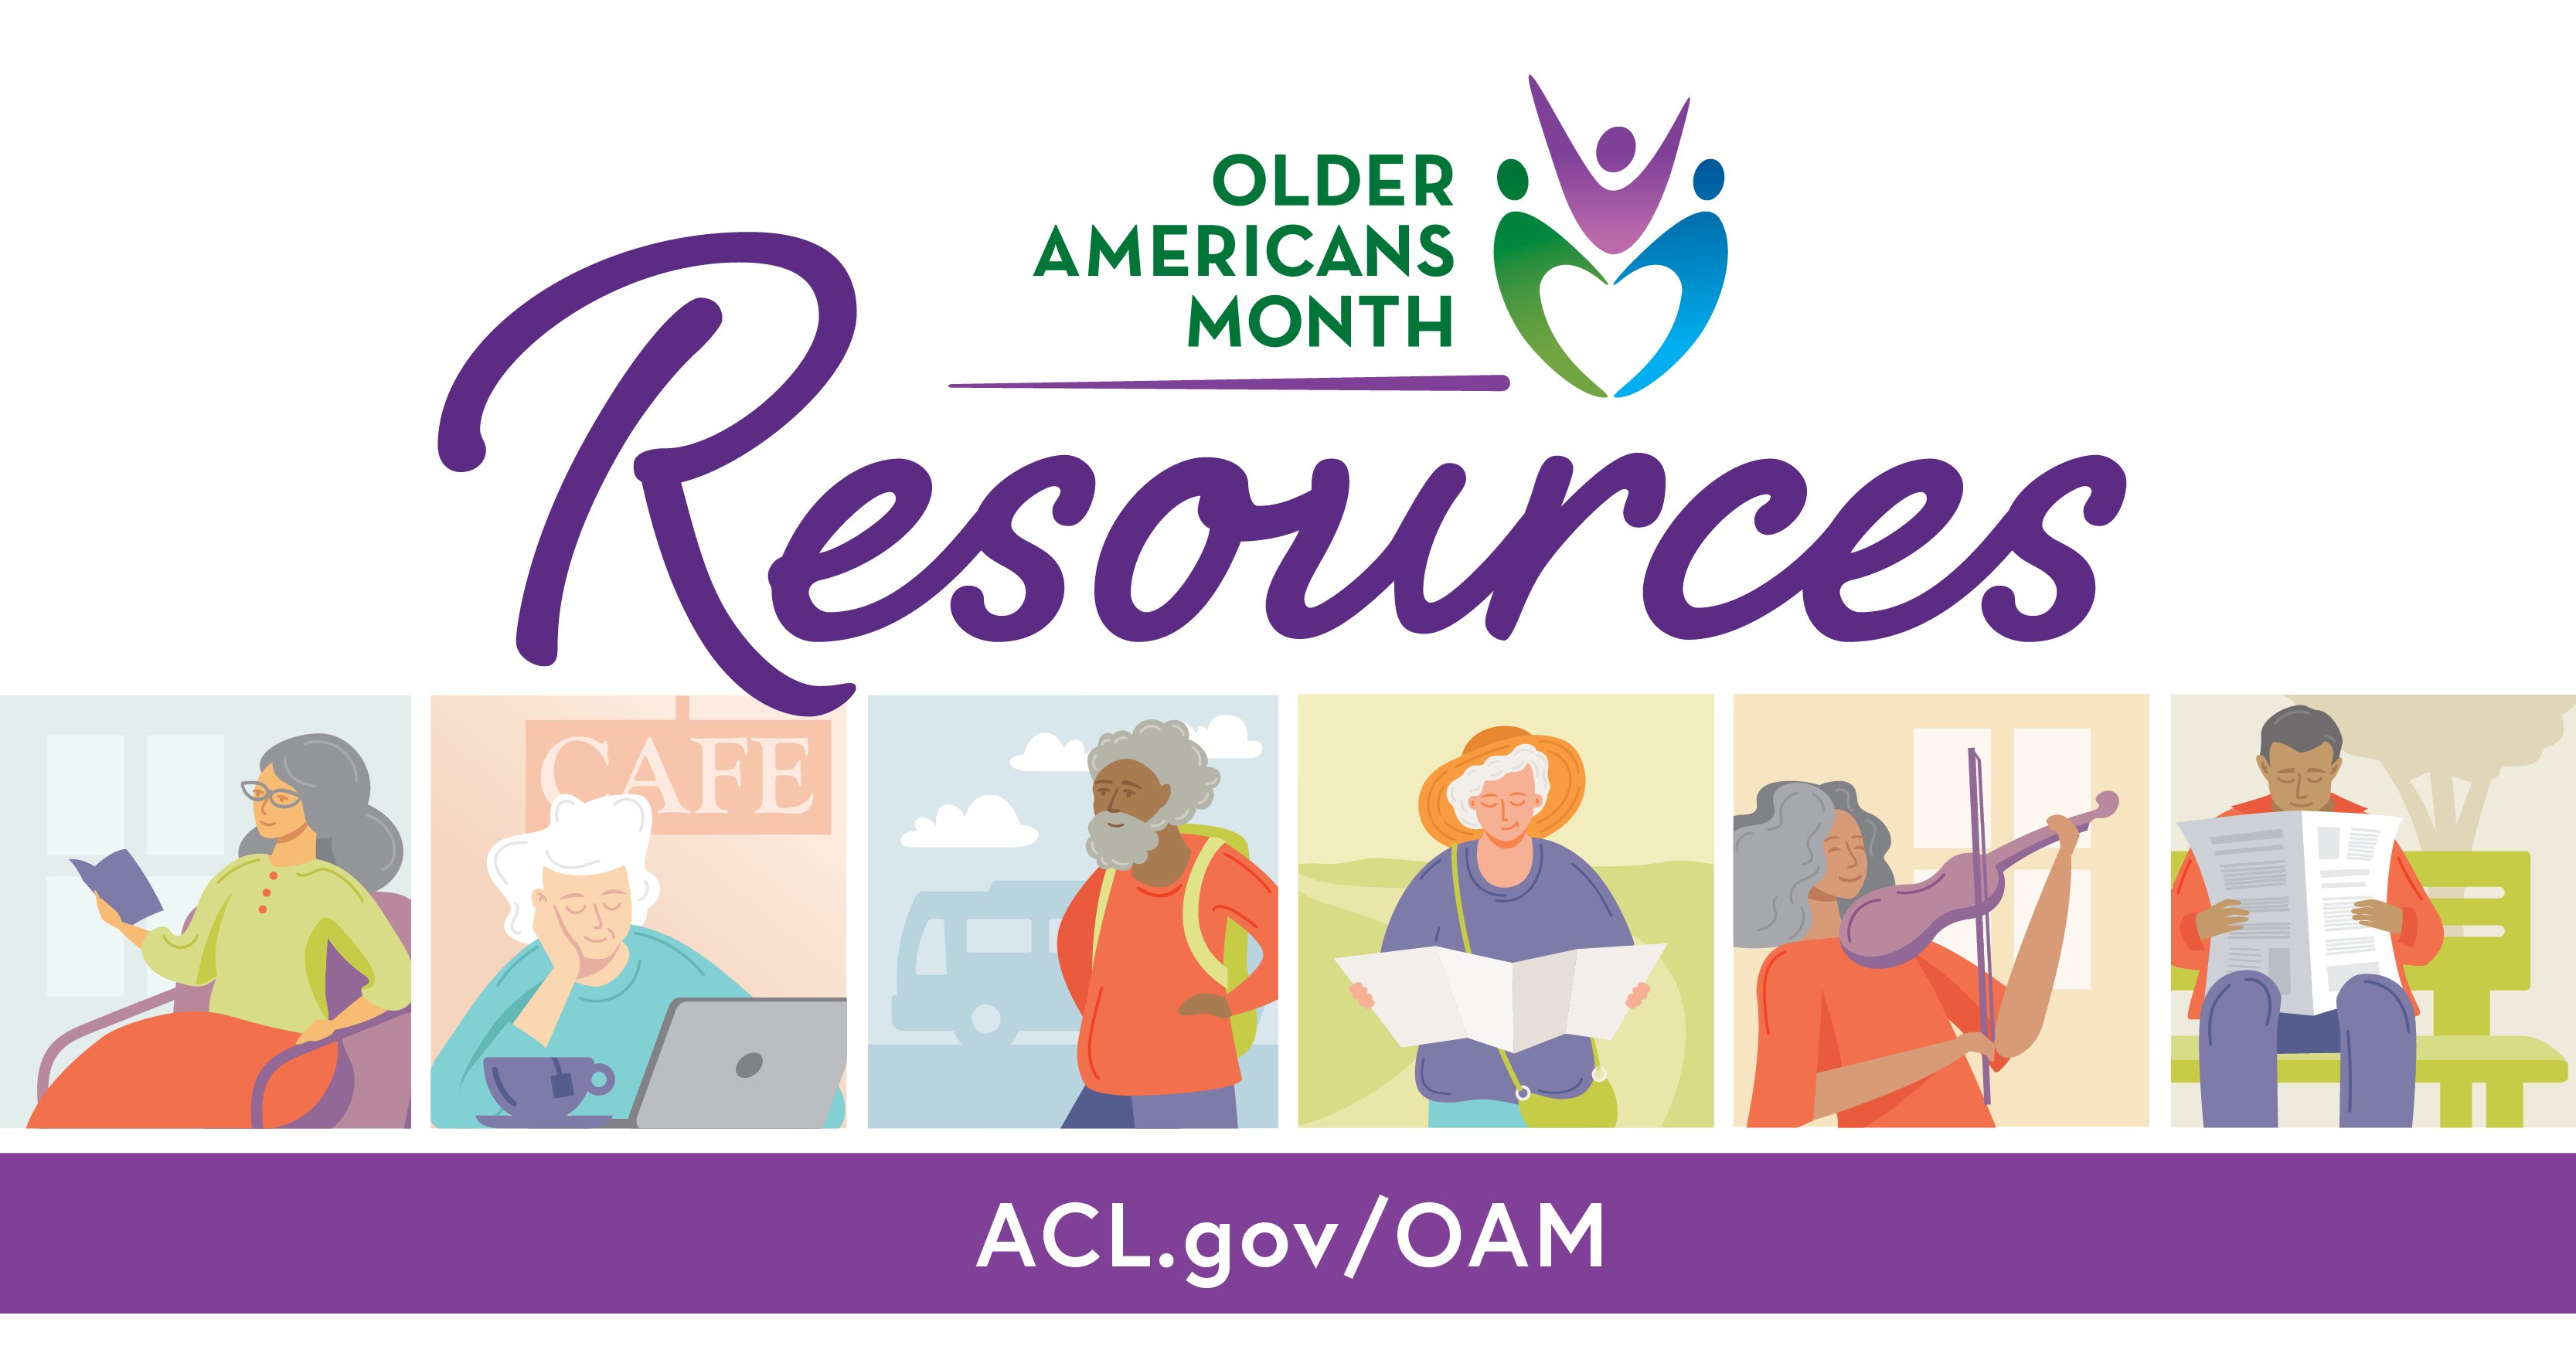 Older Americans Month Resources. ACL.gov/OAM